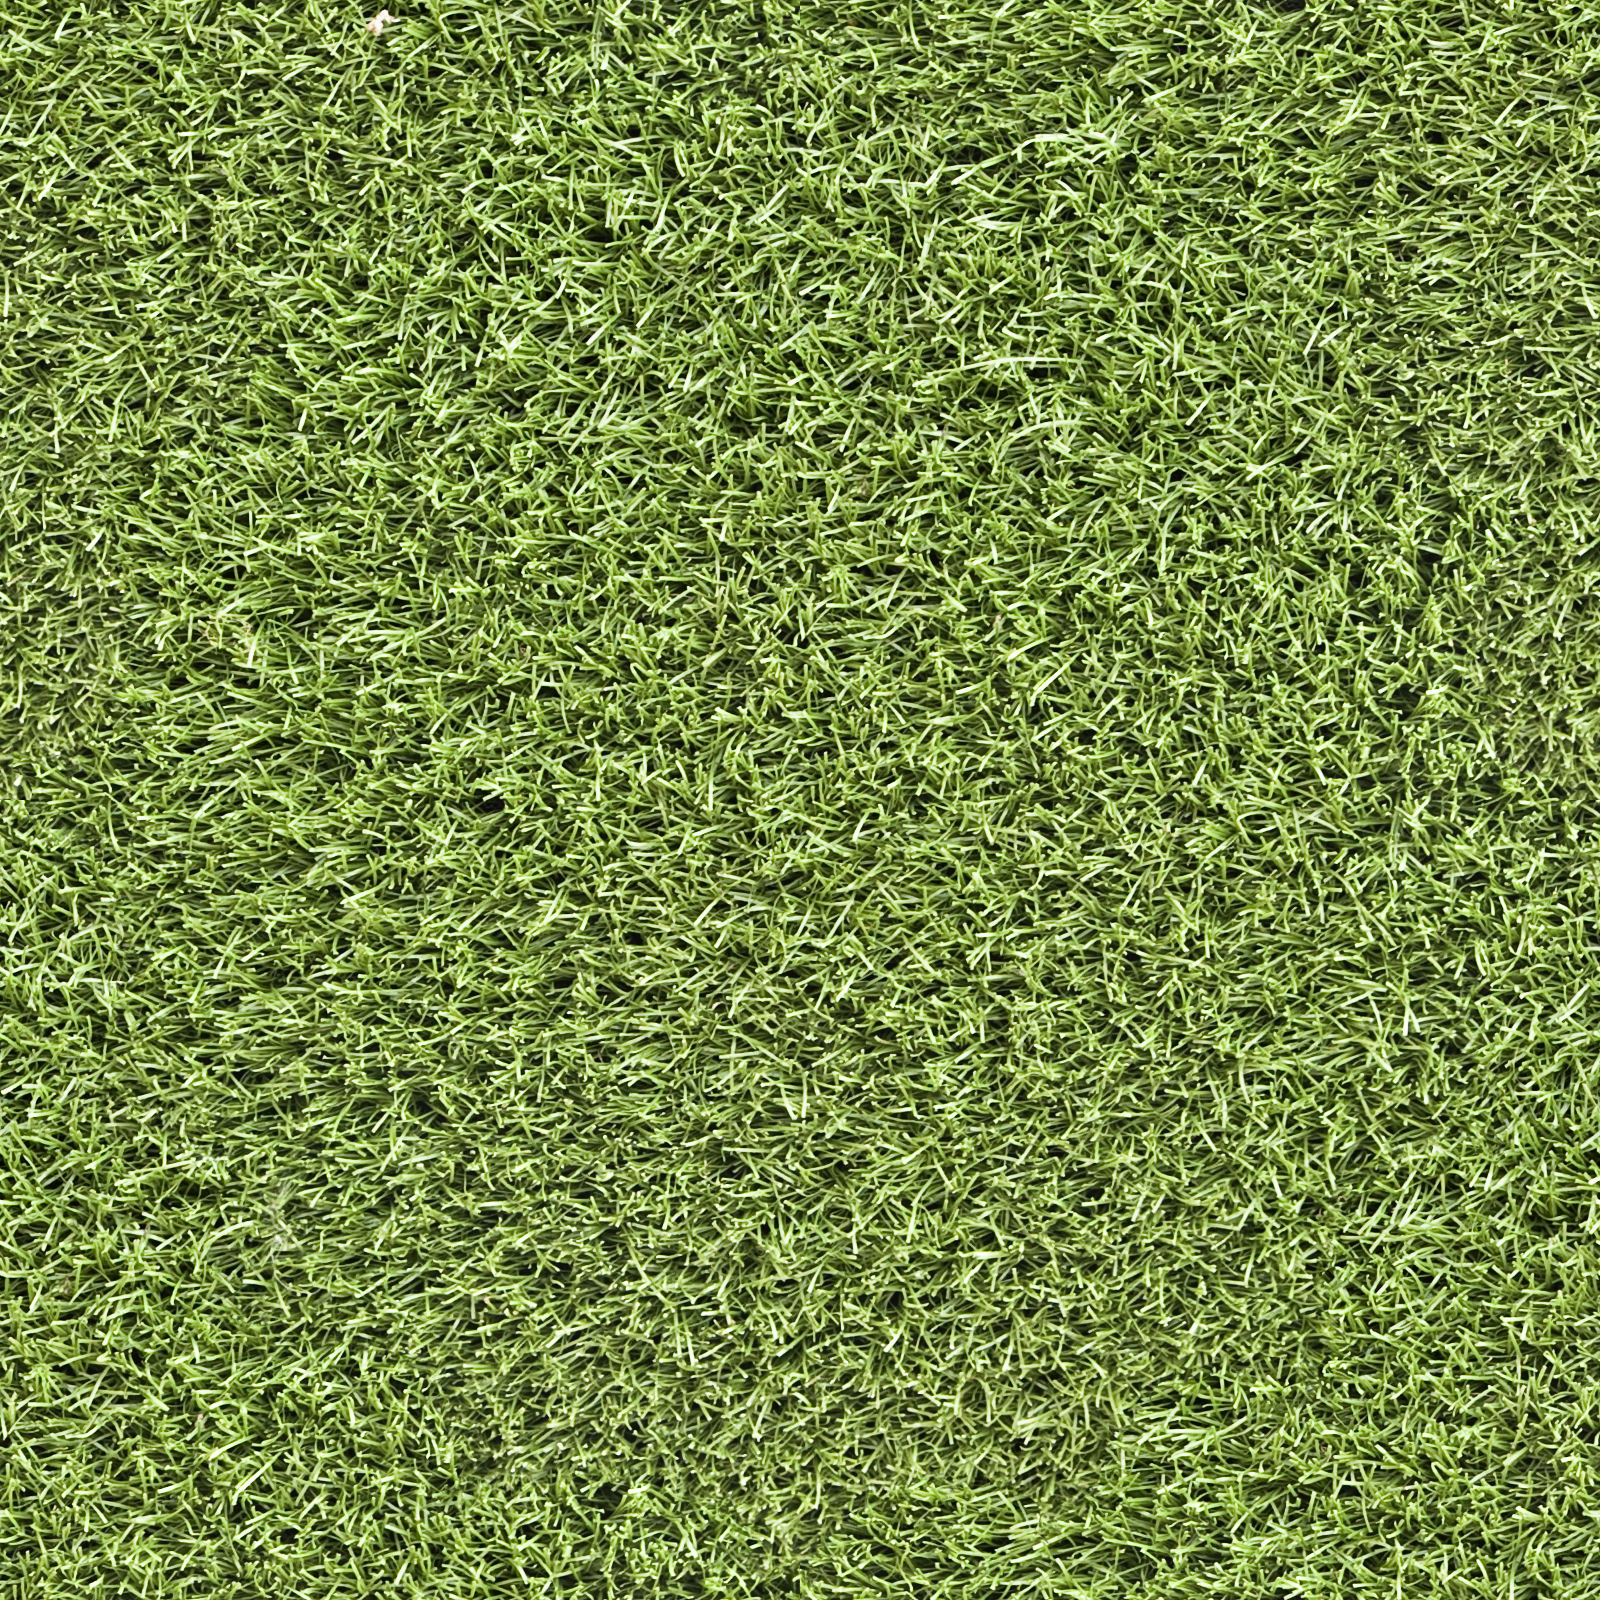 Unity 3d Grass Texture Free Download Greoptions 